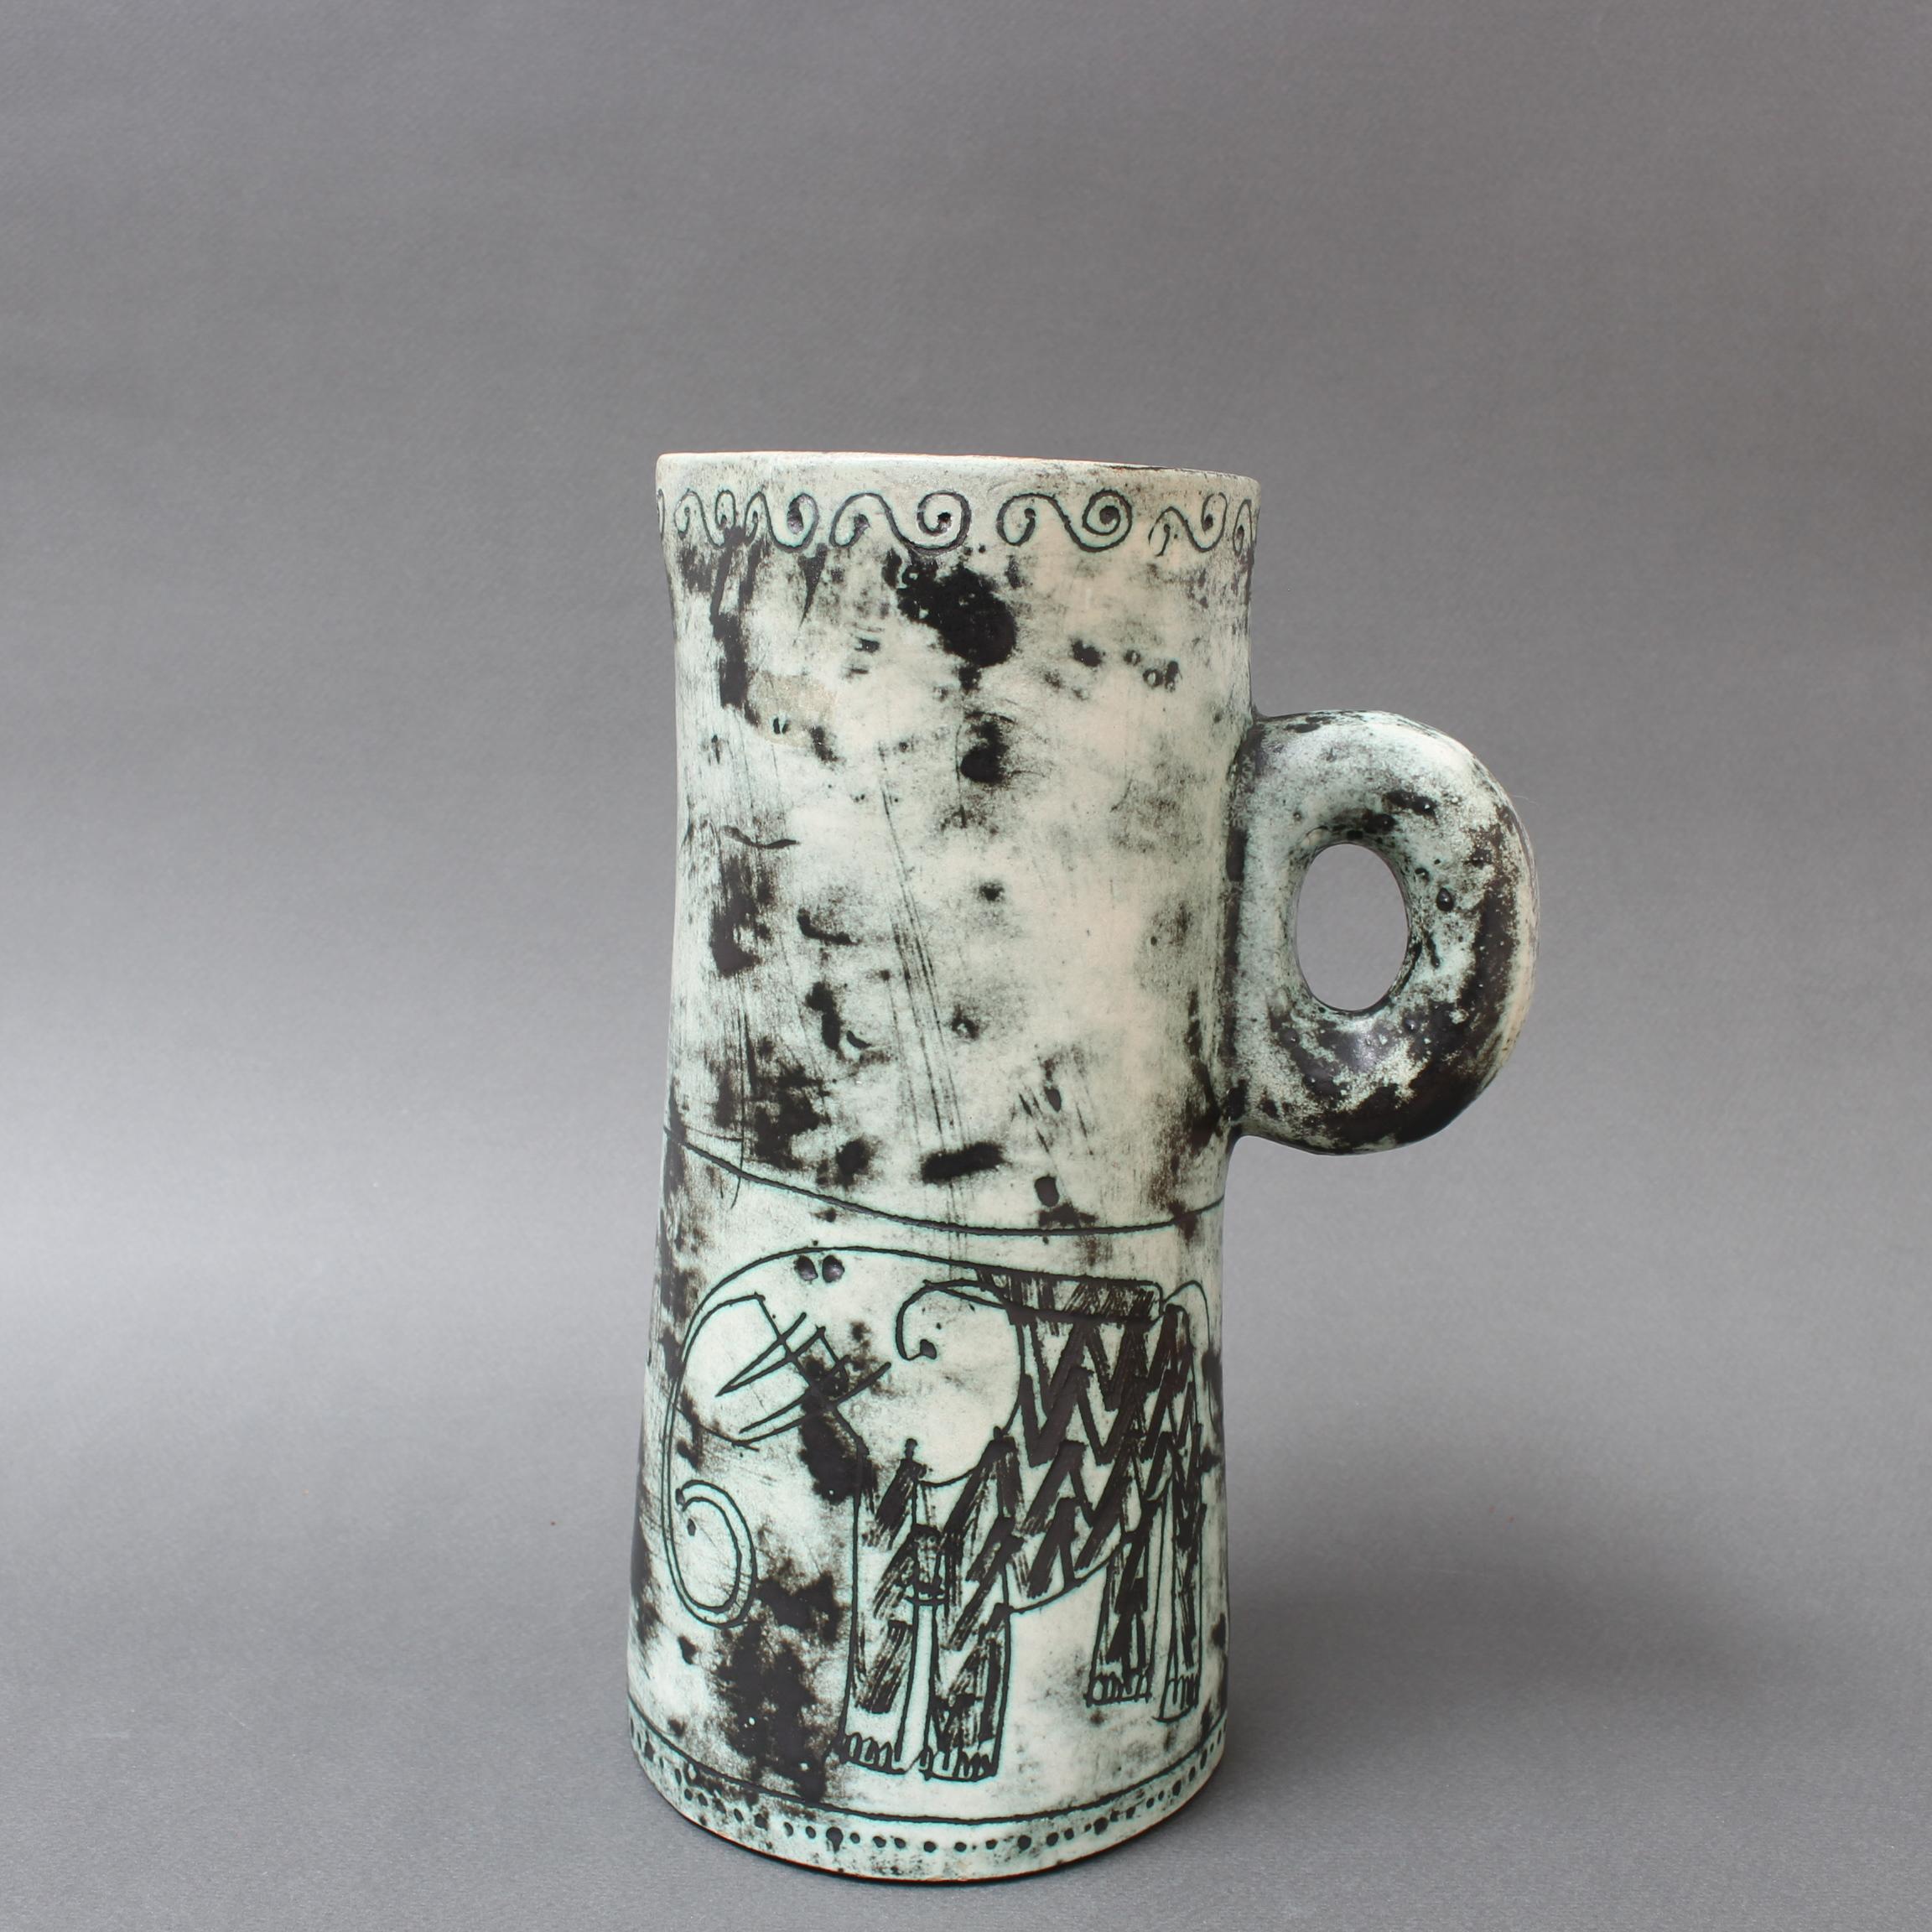 Vintage French ceramic pitcher / vase by Jacques Blin (circa 1950s). This elegant piece has Blin's trademark cloudy glaze and decoration featuring whimsical elephants and plants. The pitcher is visually divided in two by an irregular line encircling